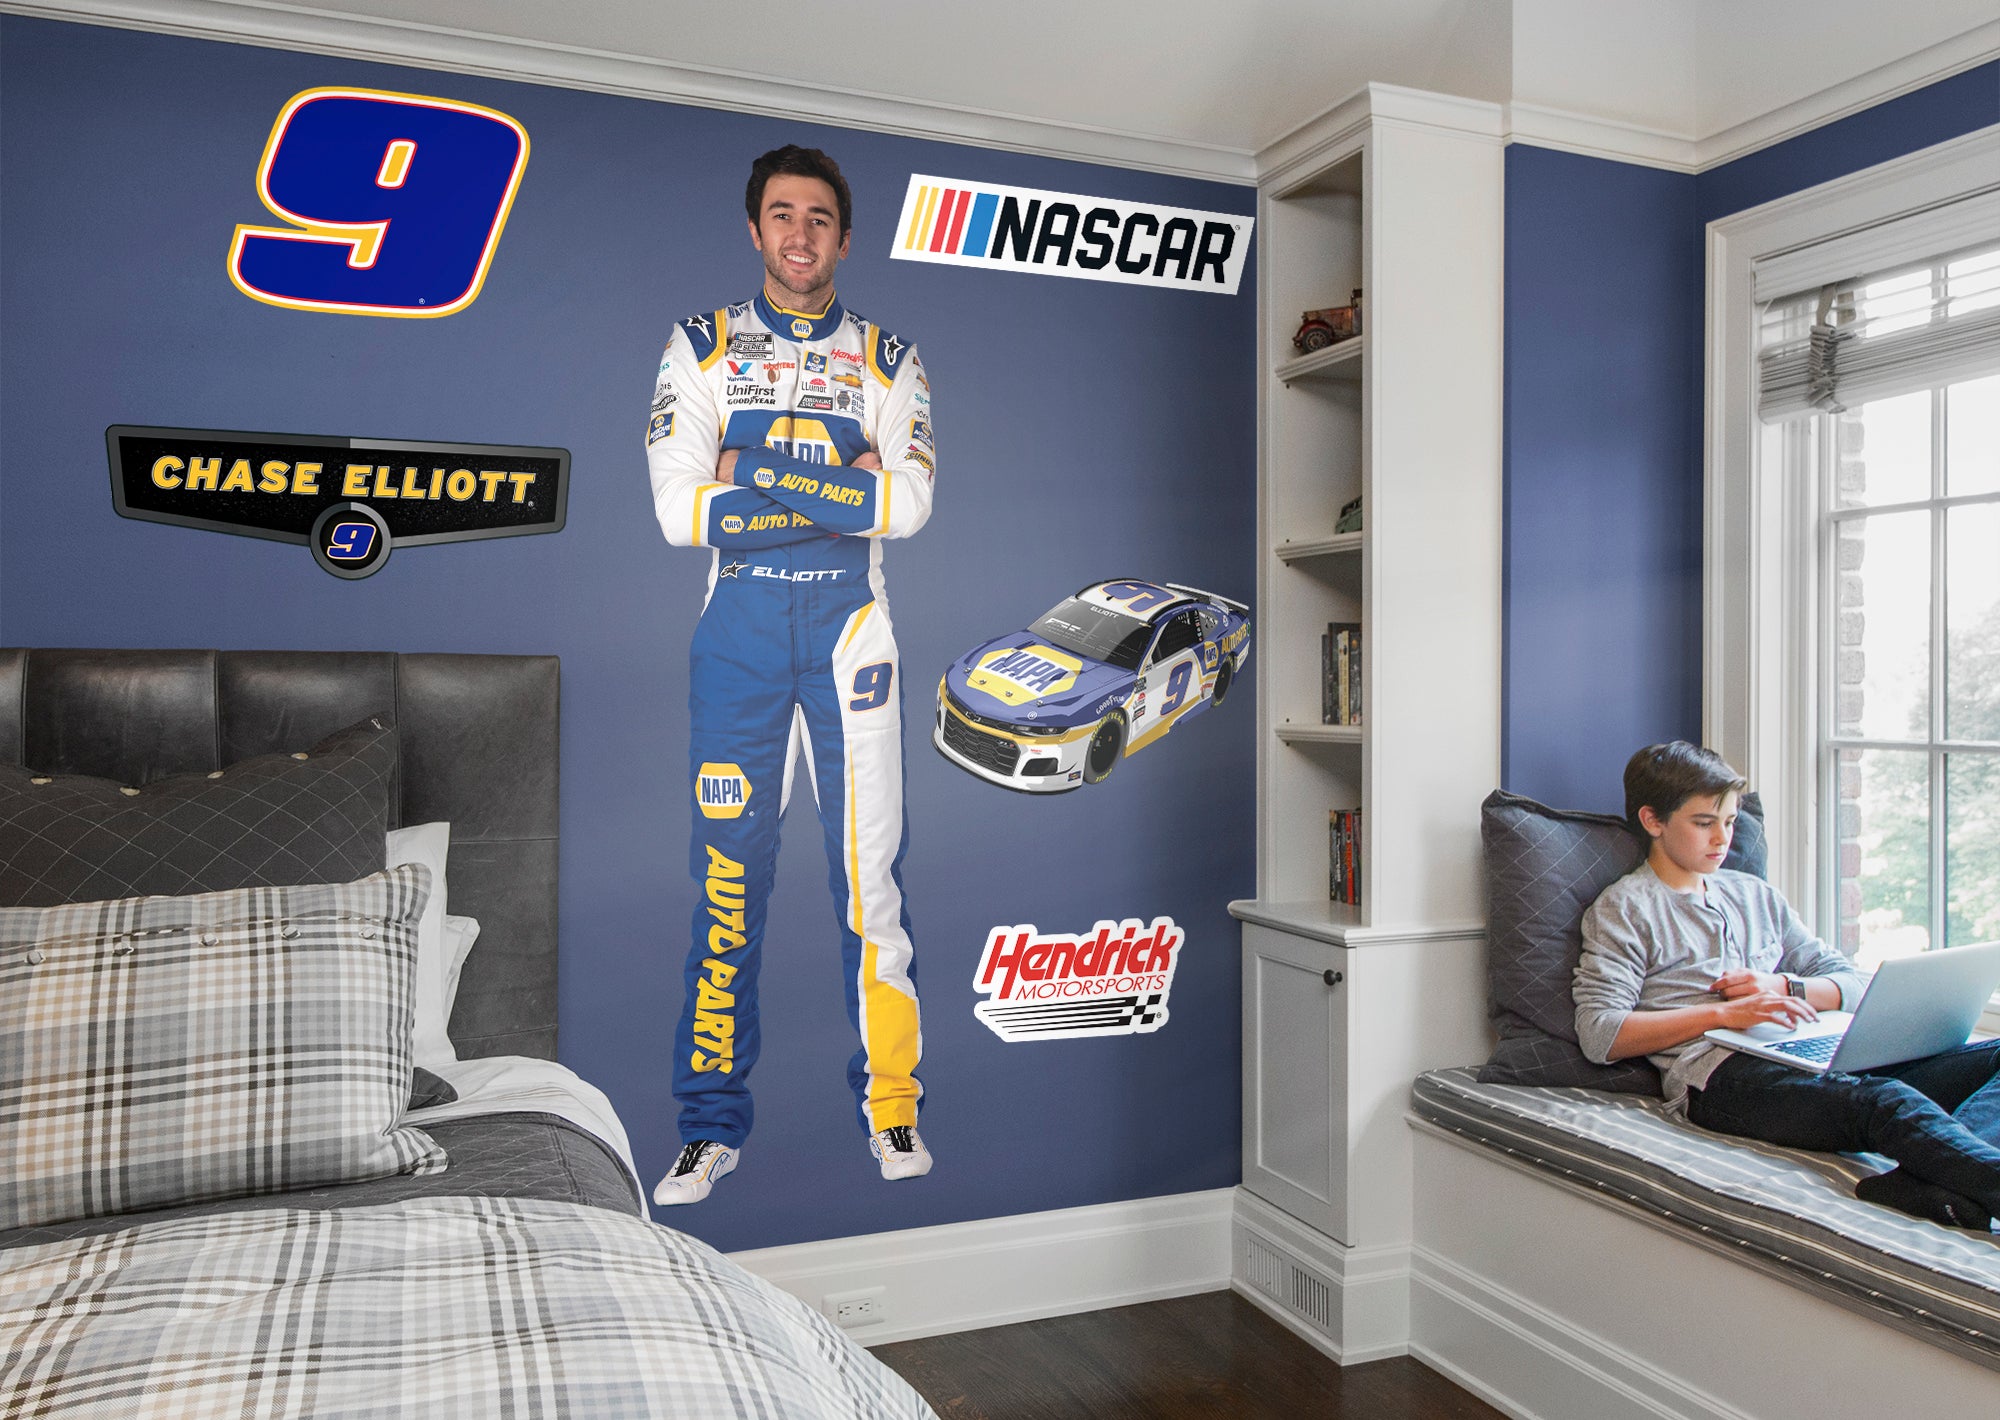 Chase Elliott 2021 Driver - Officially Licensed NASCAR Removable Wall Decal Life-Size Character + 5 Decals (78"W x 23"H) by Fath